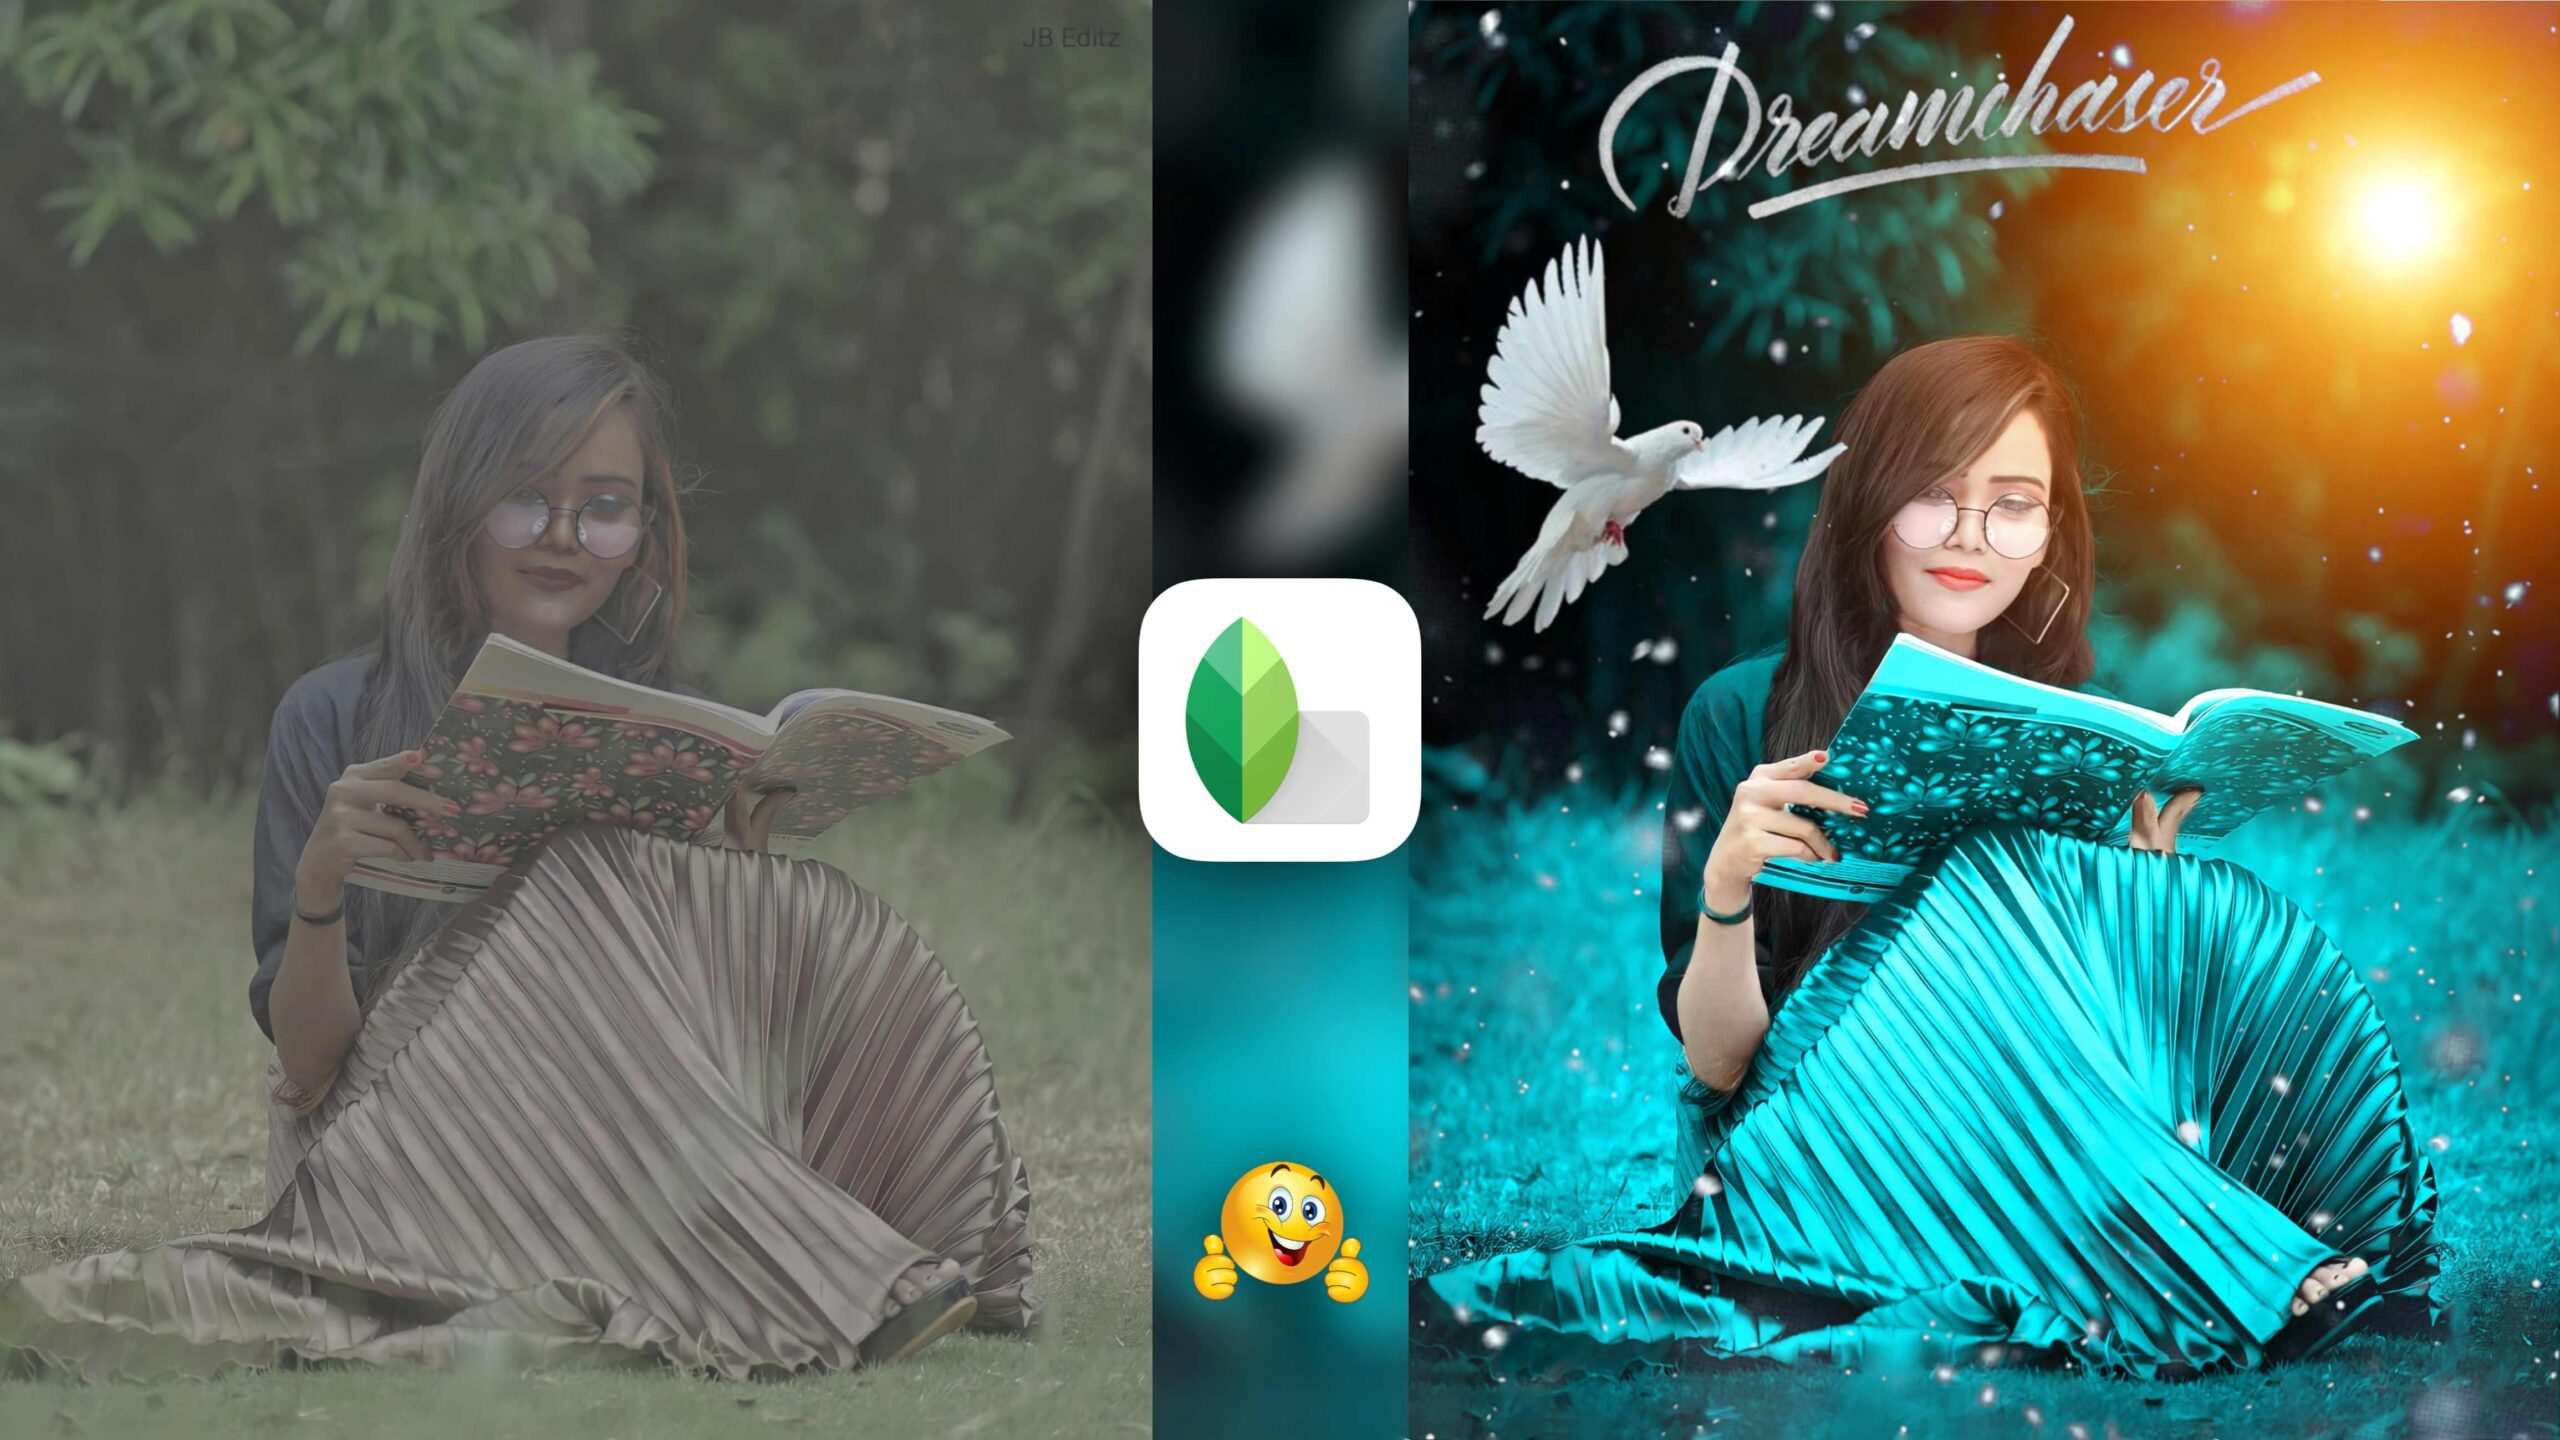 Snapseed Green And Bird Effect Photo Editing Tutorial | Snapseed Background Colour Change Tricks - MUNAWAR EDITS